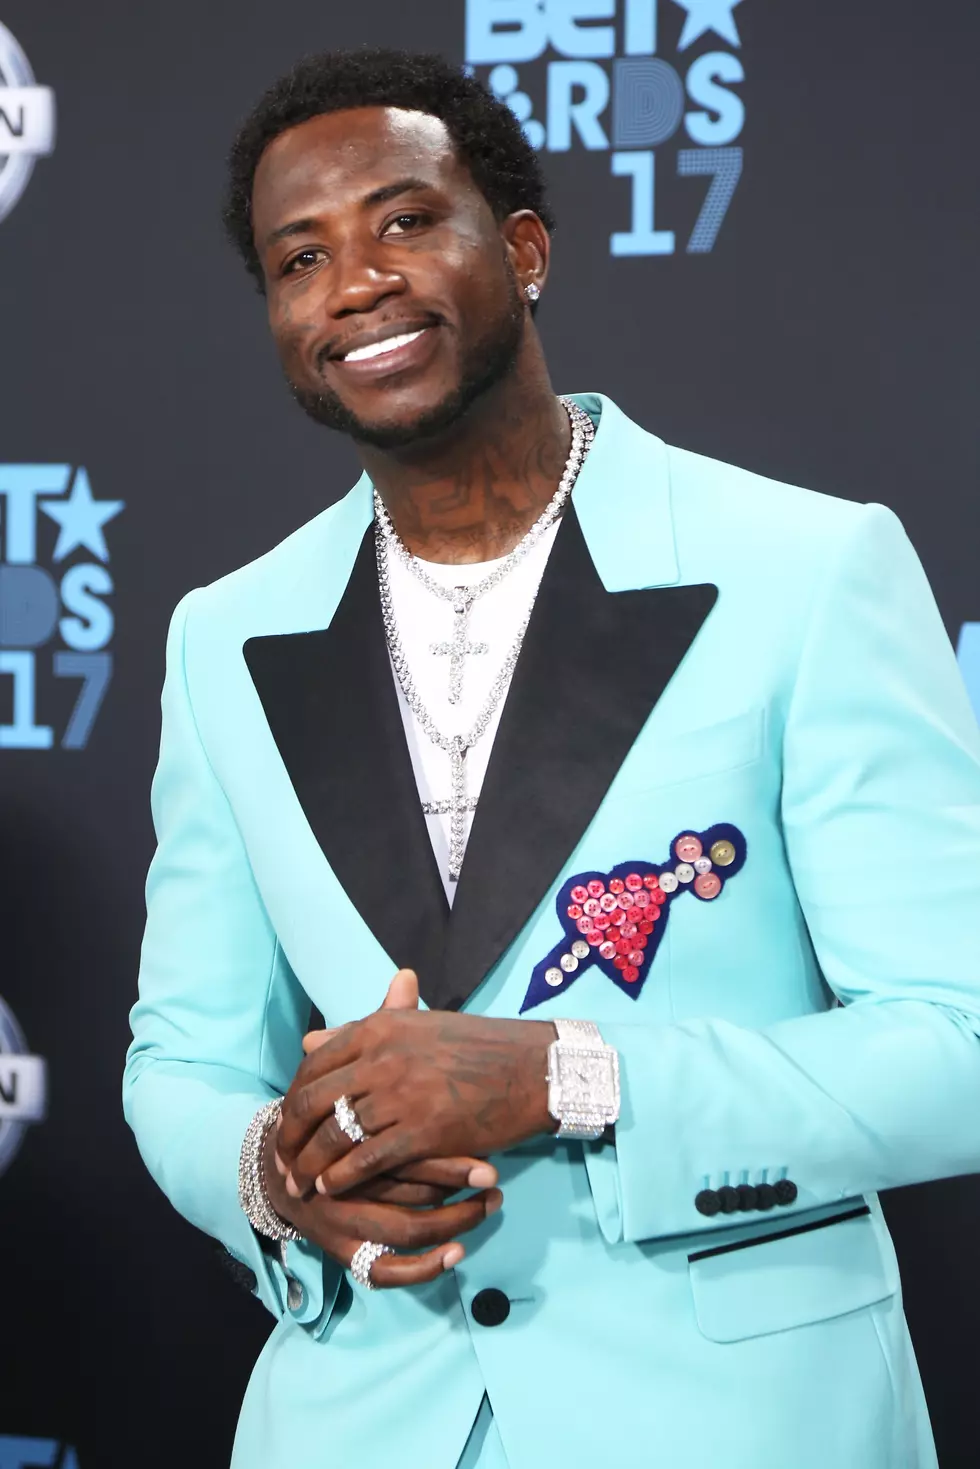 Gucci Mane’s Baby Mama Suing Him For More Child Support